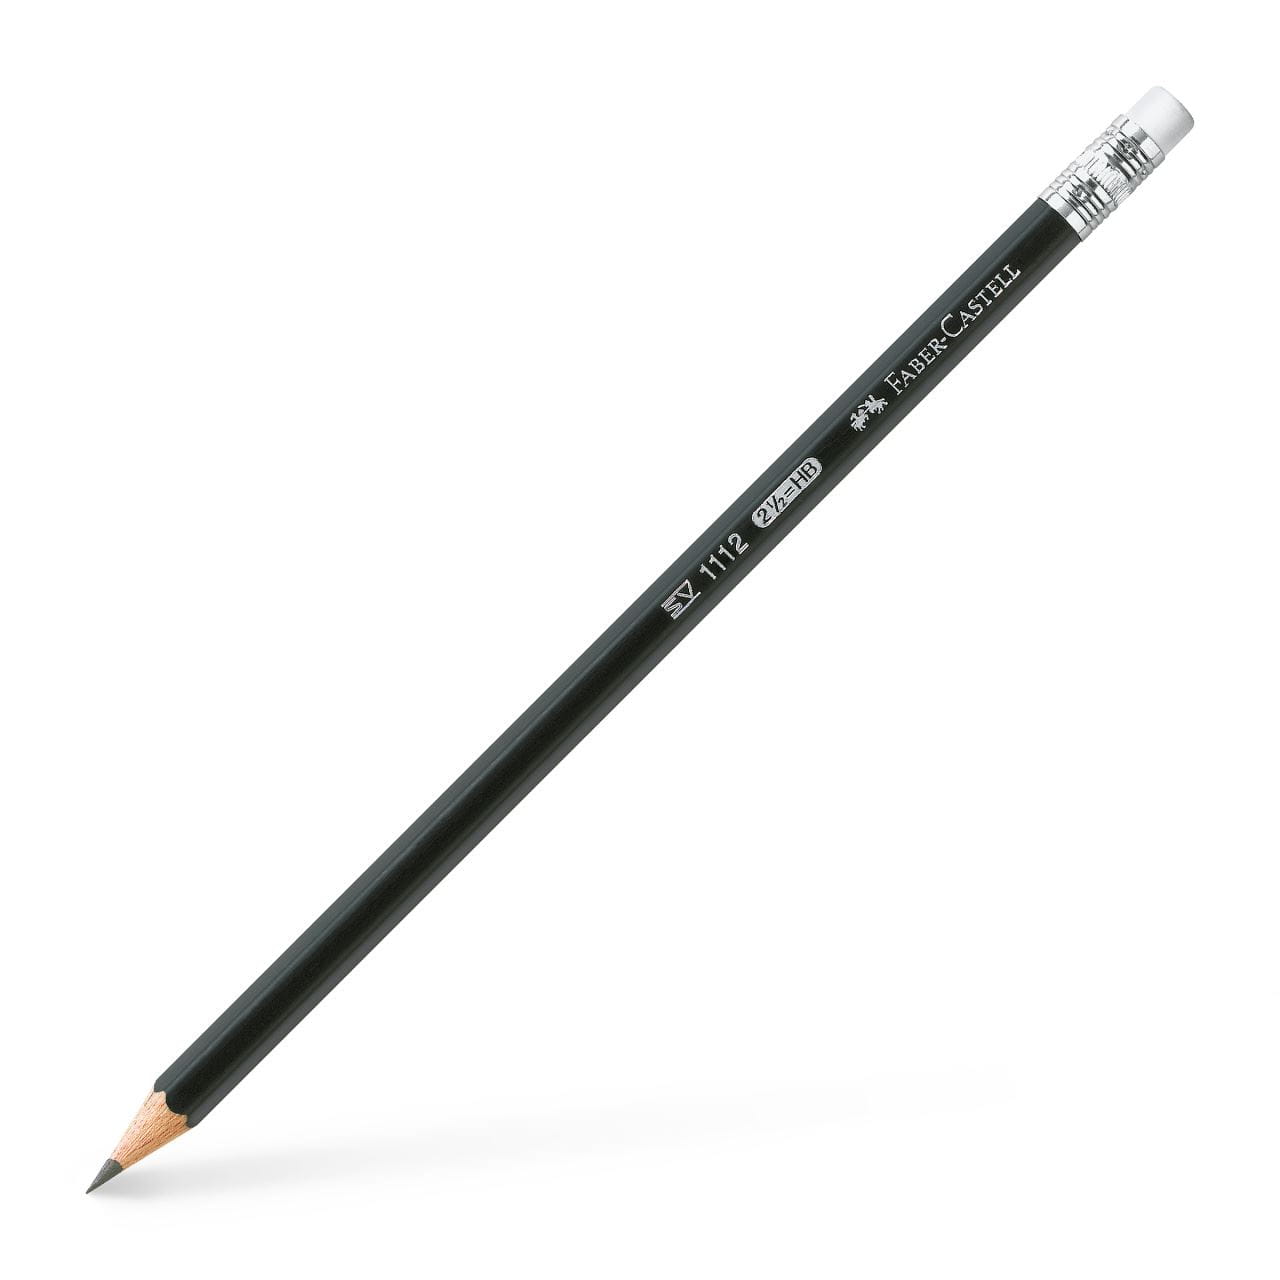 Faber-Castell - 1112 graphite pencil with eraser, HB